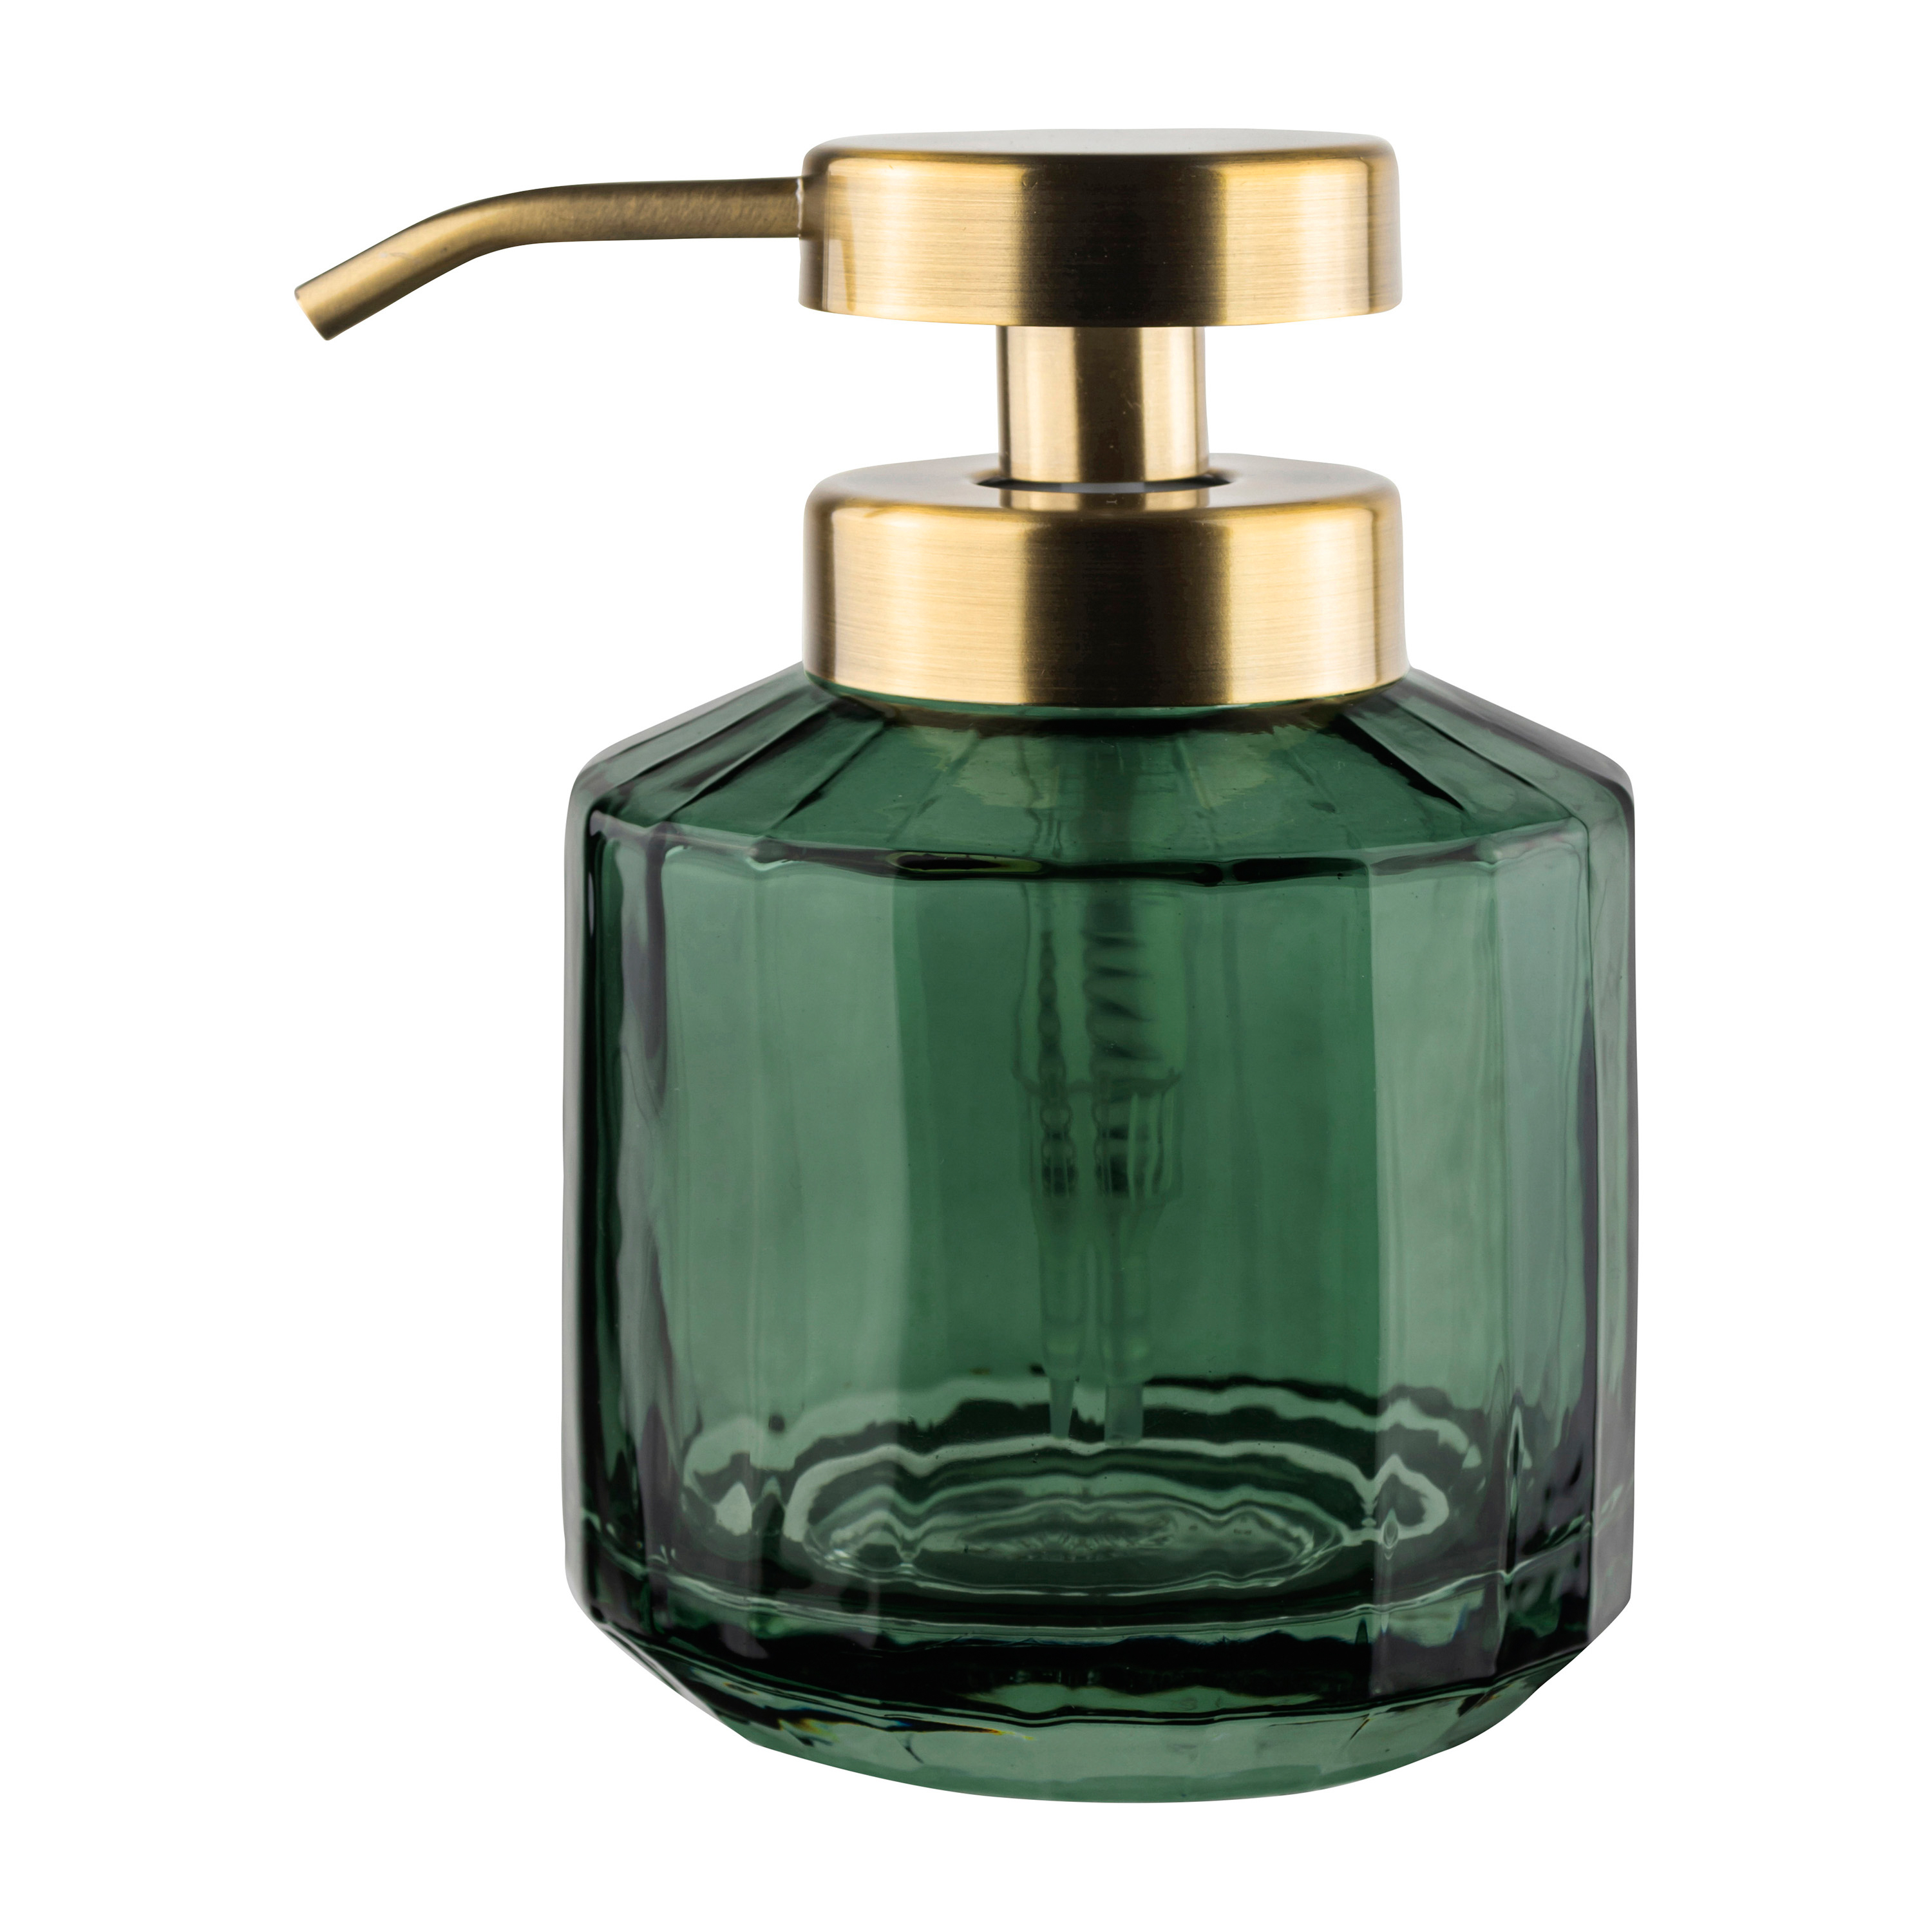 Vision soap dispenser low from Mette Ditmer 